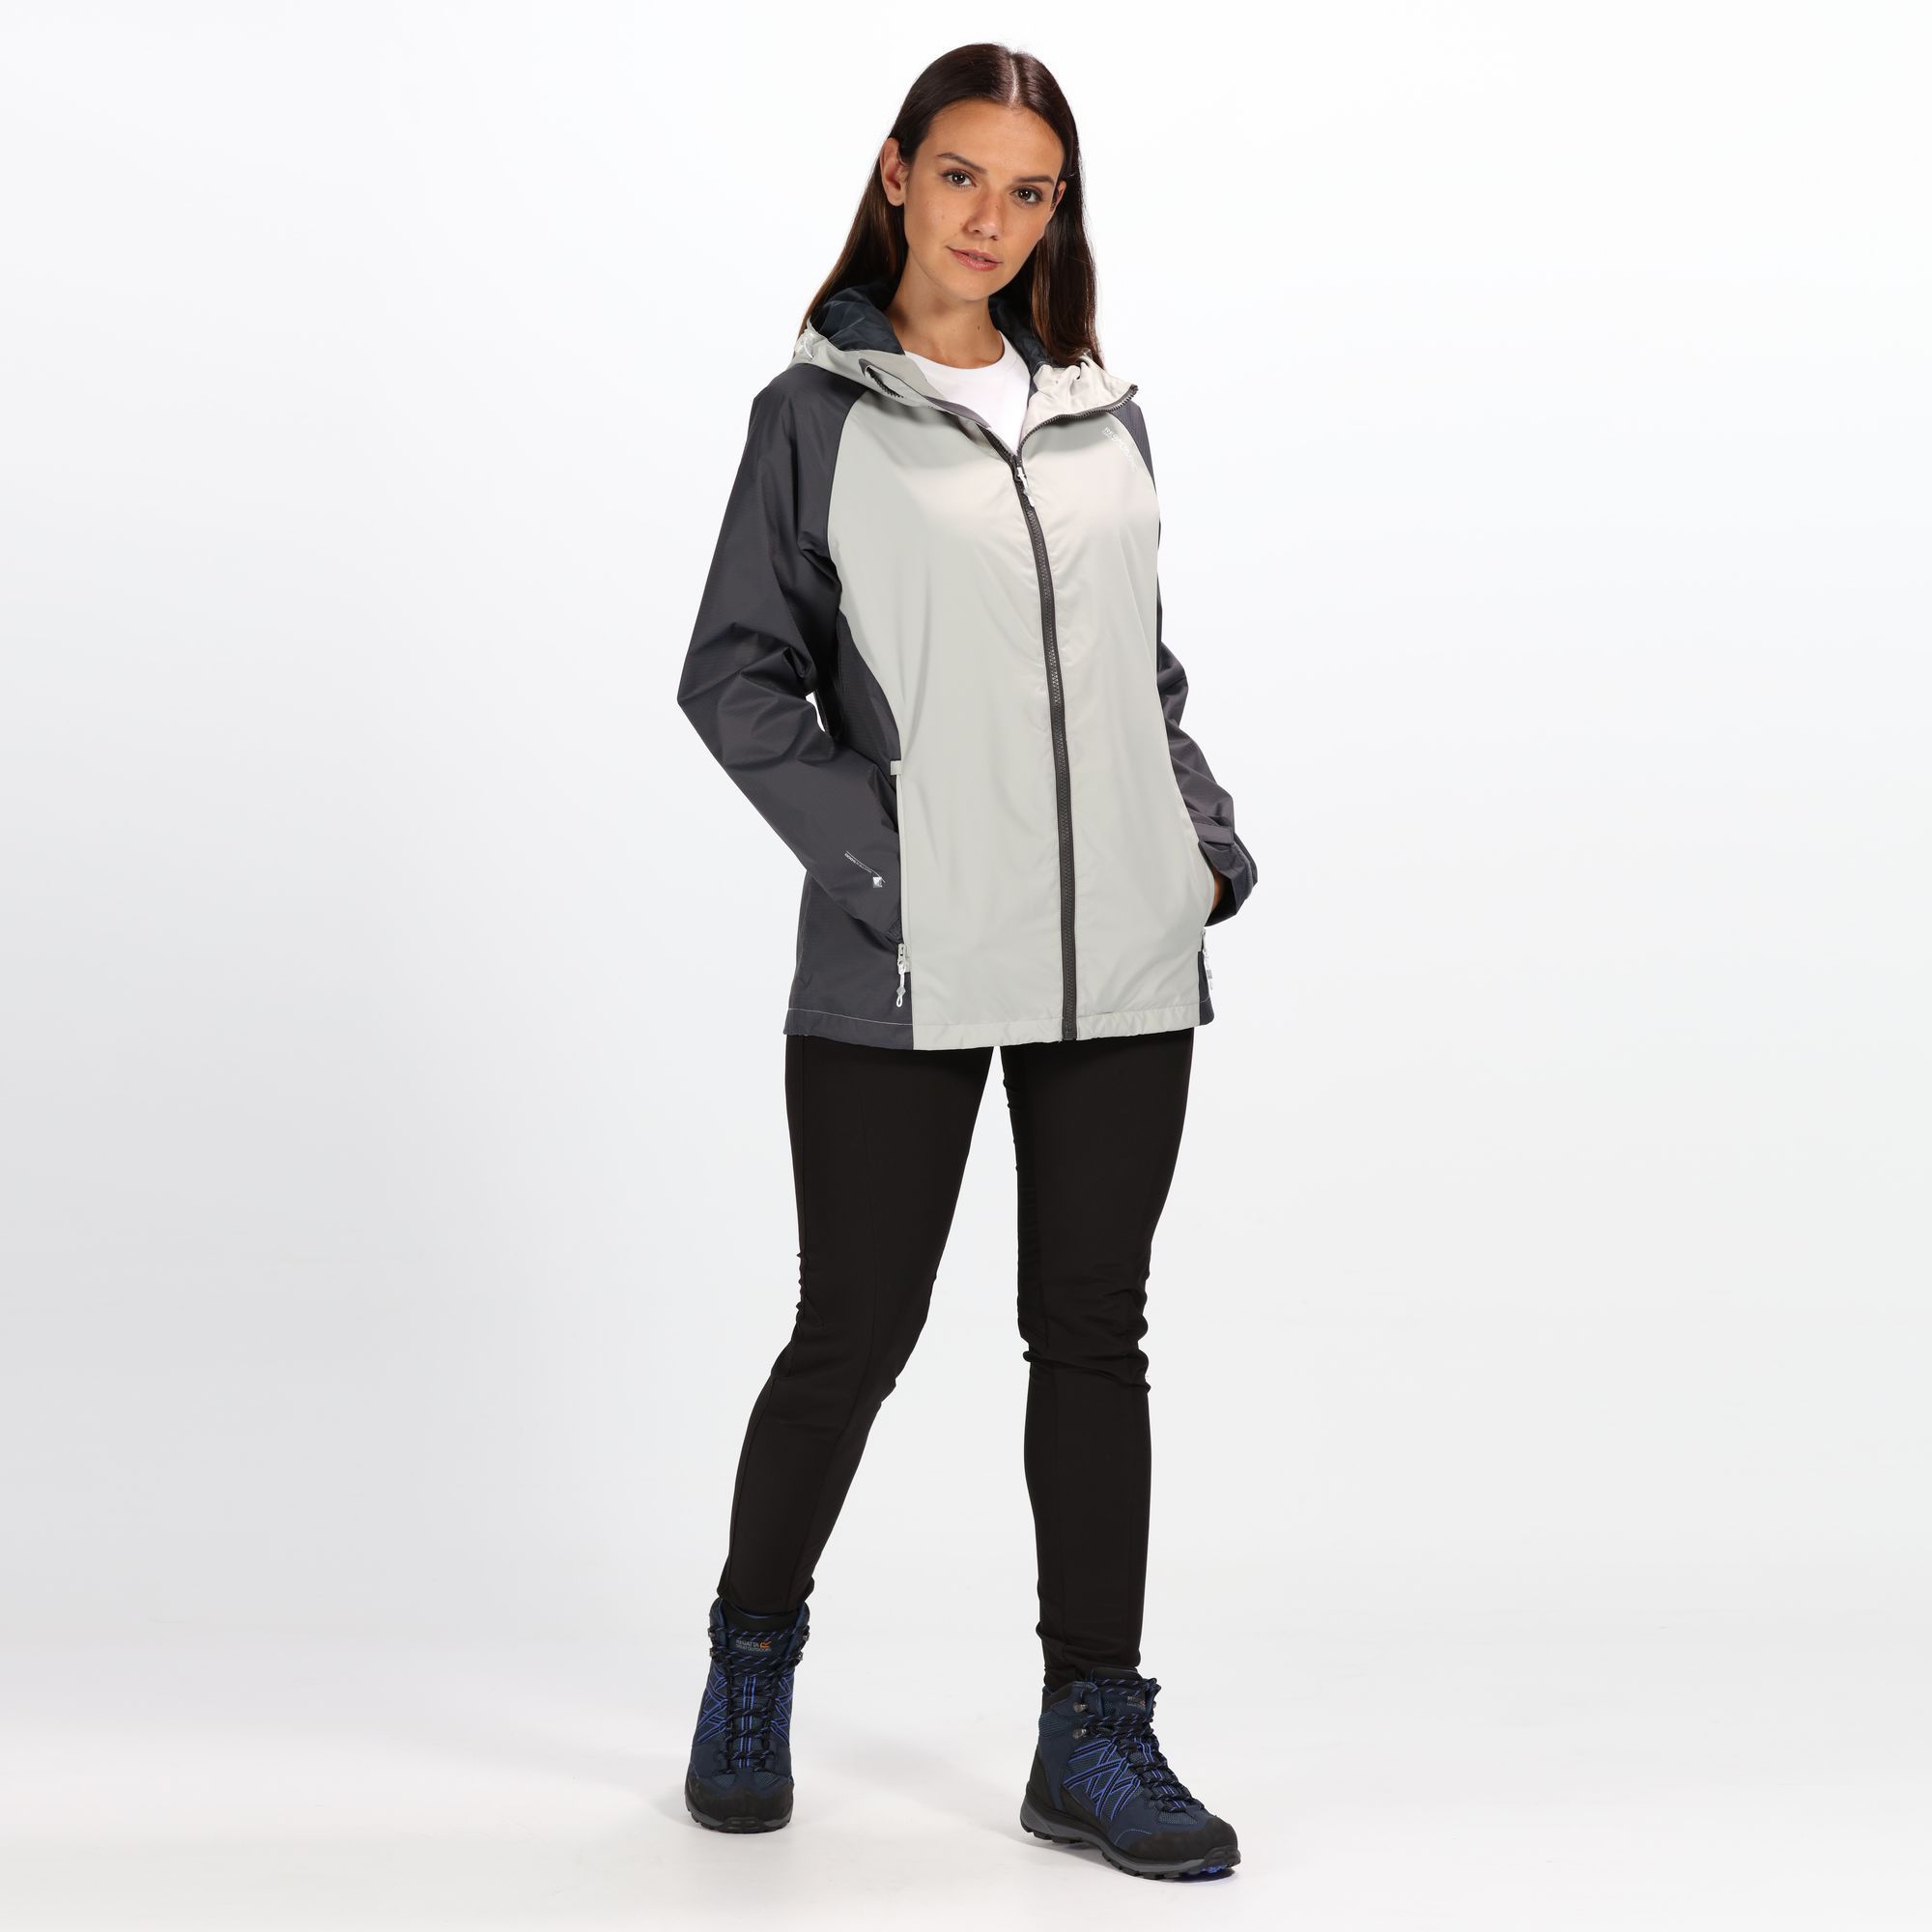 Material: 100% polyester fabric. Durable water repellent finish. Taped seams. Grown on technical hood with adjusters. 2 zipped lower pockets. Internal map pocket. Adjustable cuffs. Adjustable shockcord hem.